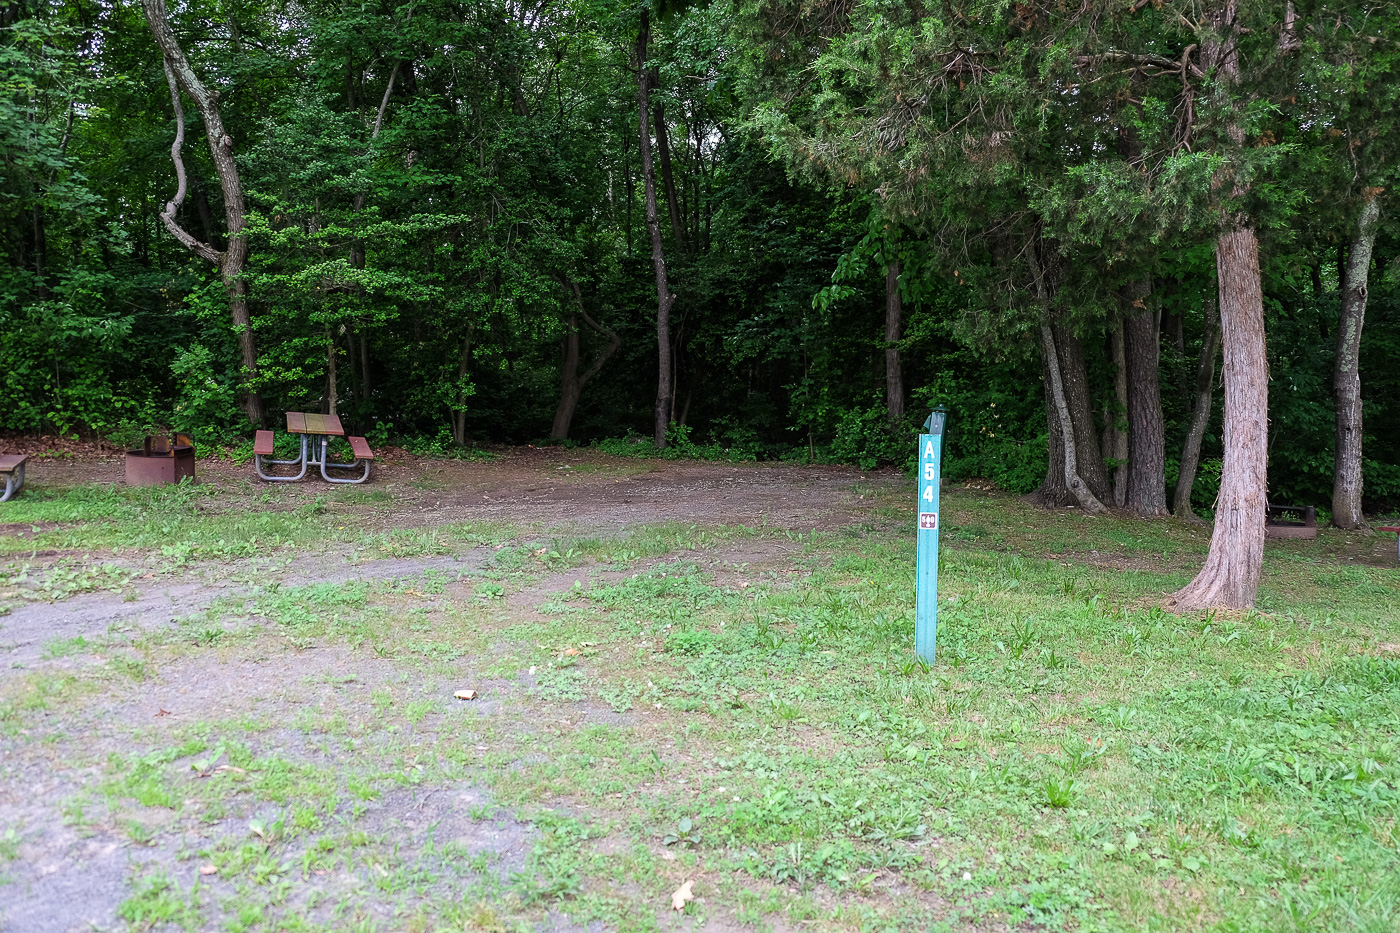 Lake Fairfax Park Campground Review Great Option Near Washington Dc Boxy Colonial On The Road 9993